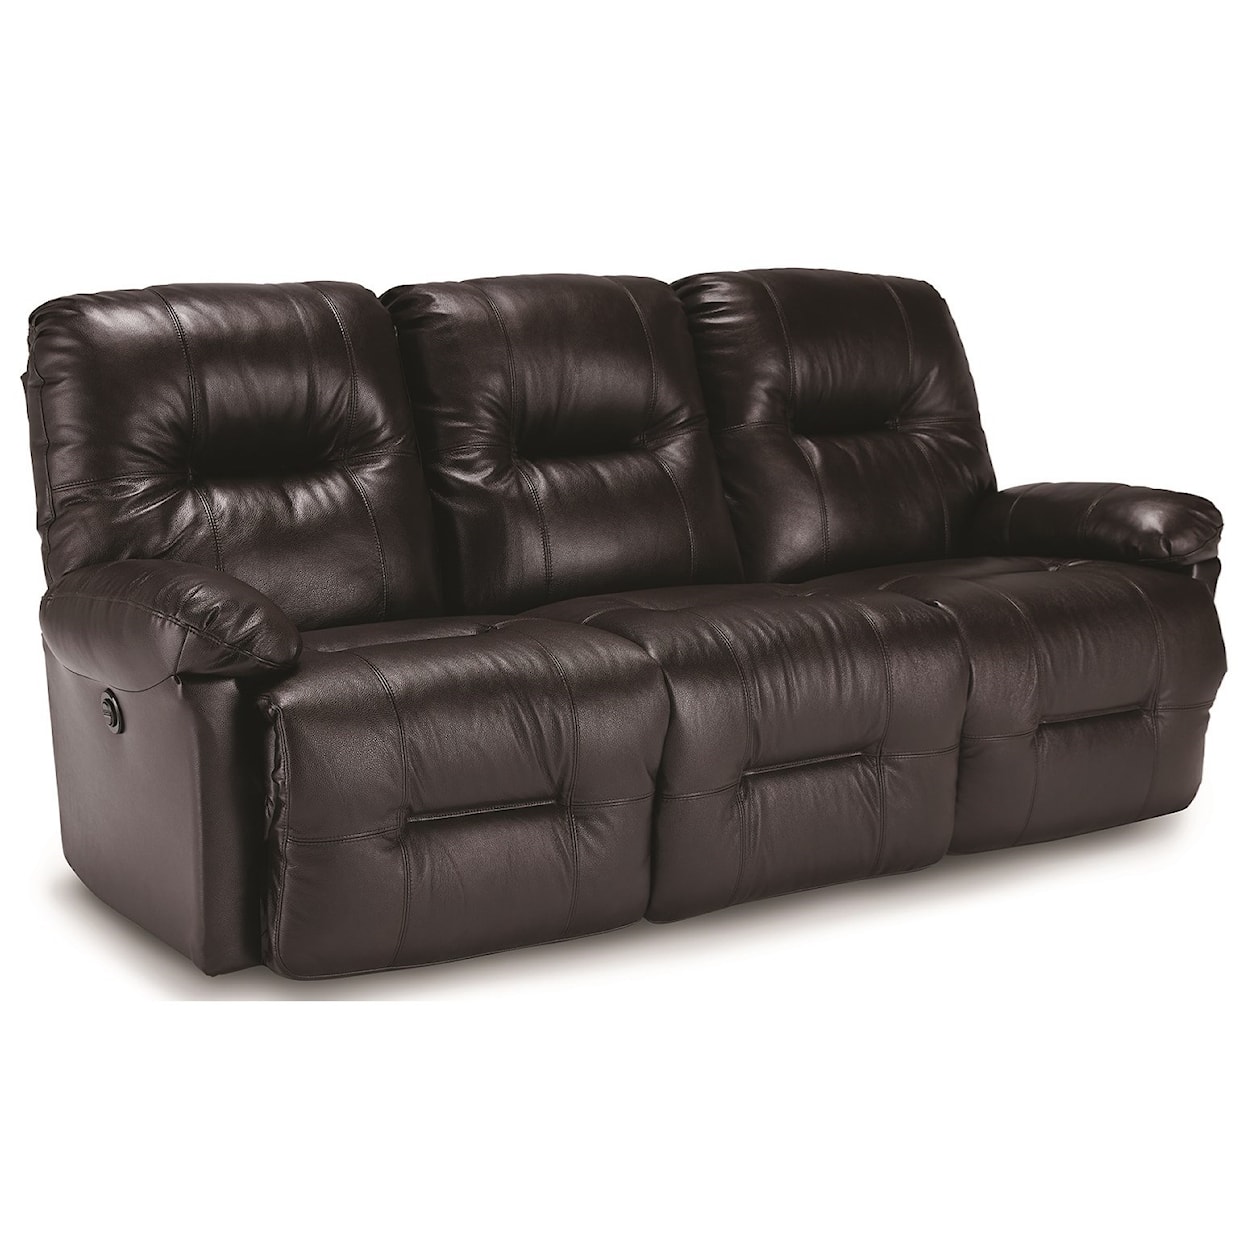 Why Is Leather Furniture Better?, Baer's Furniture